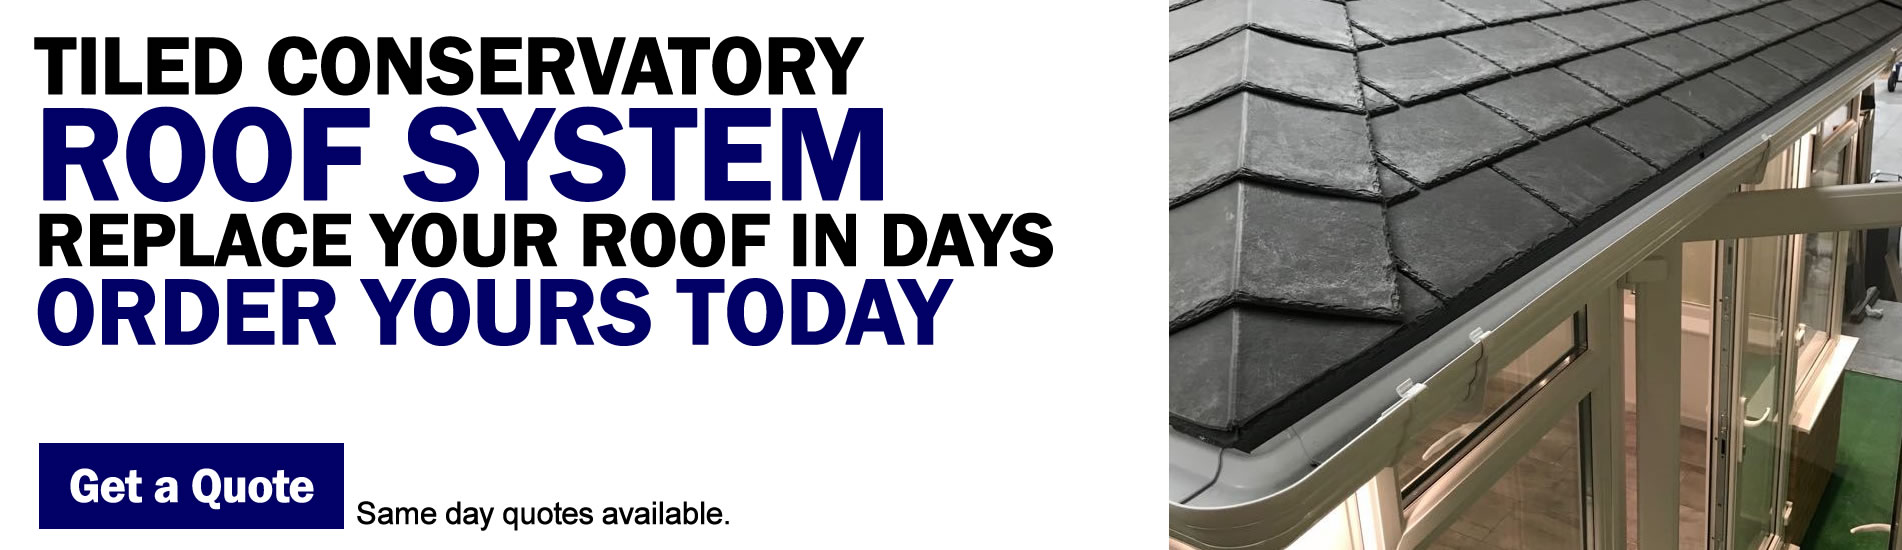 we offer replacement tiled conservatory roof sytems in Barry